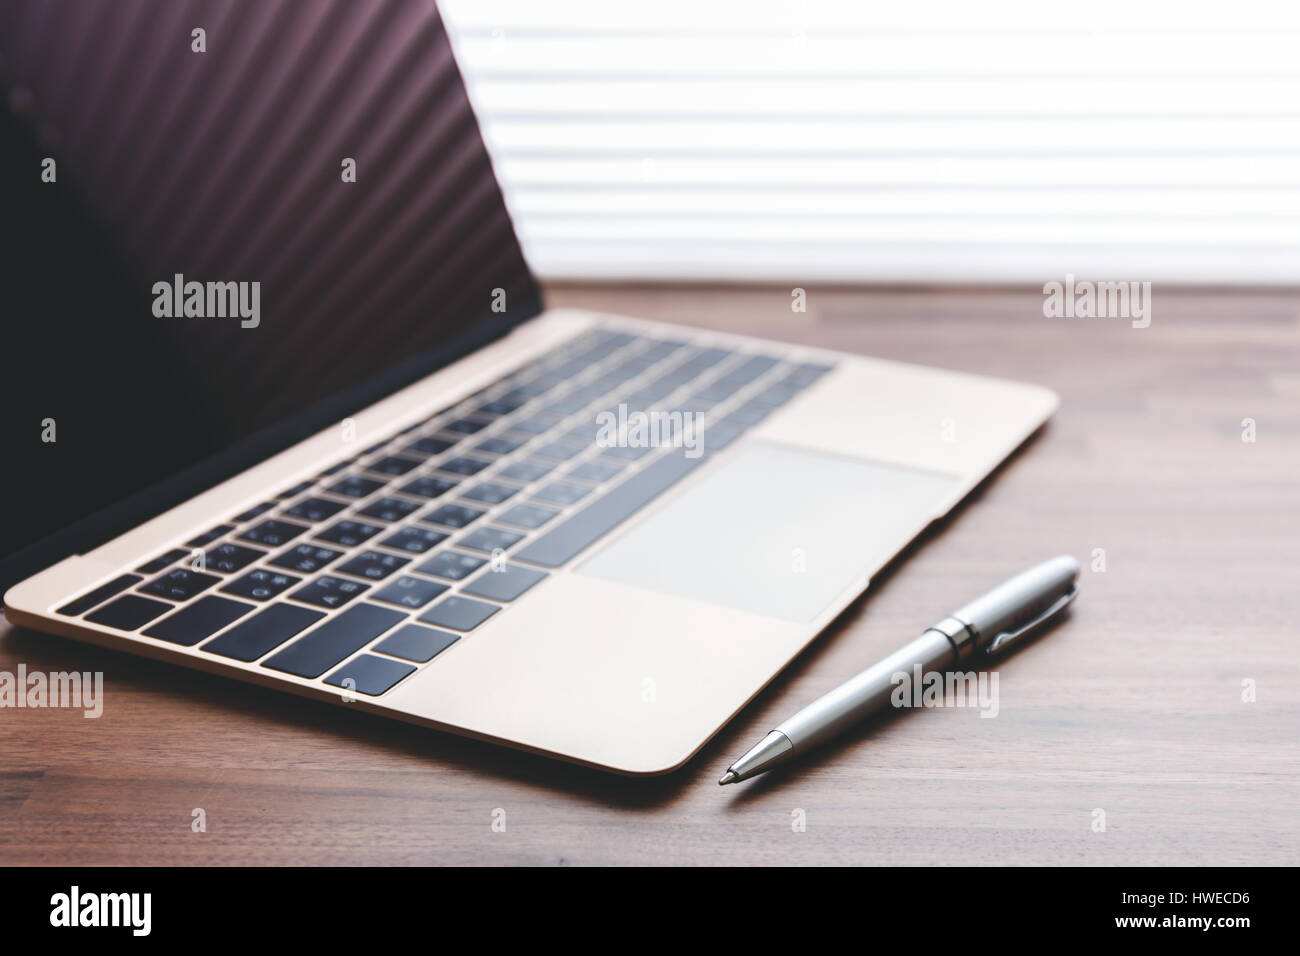 Laptop with pen on office table Stock Photo